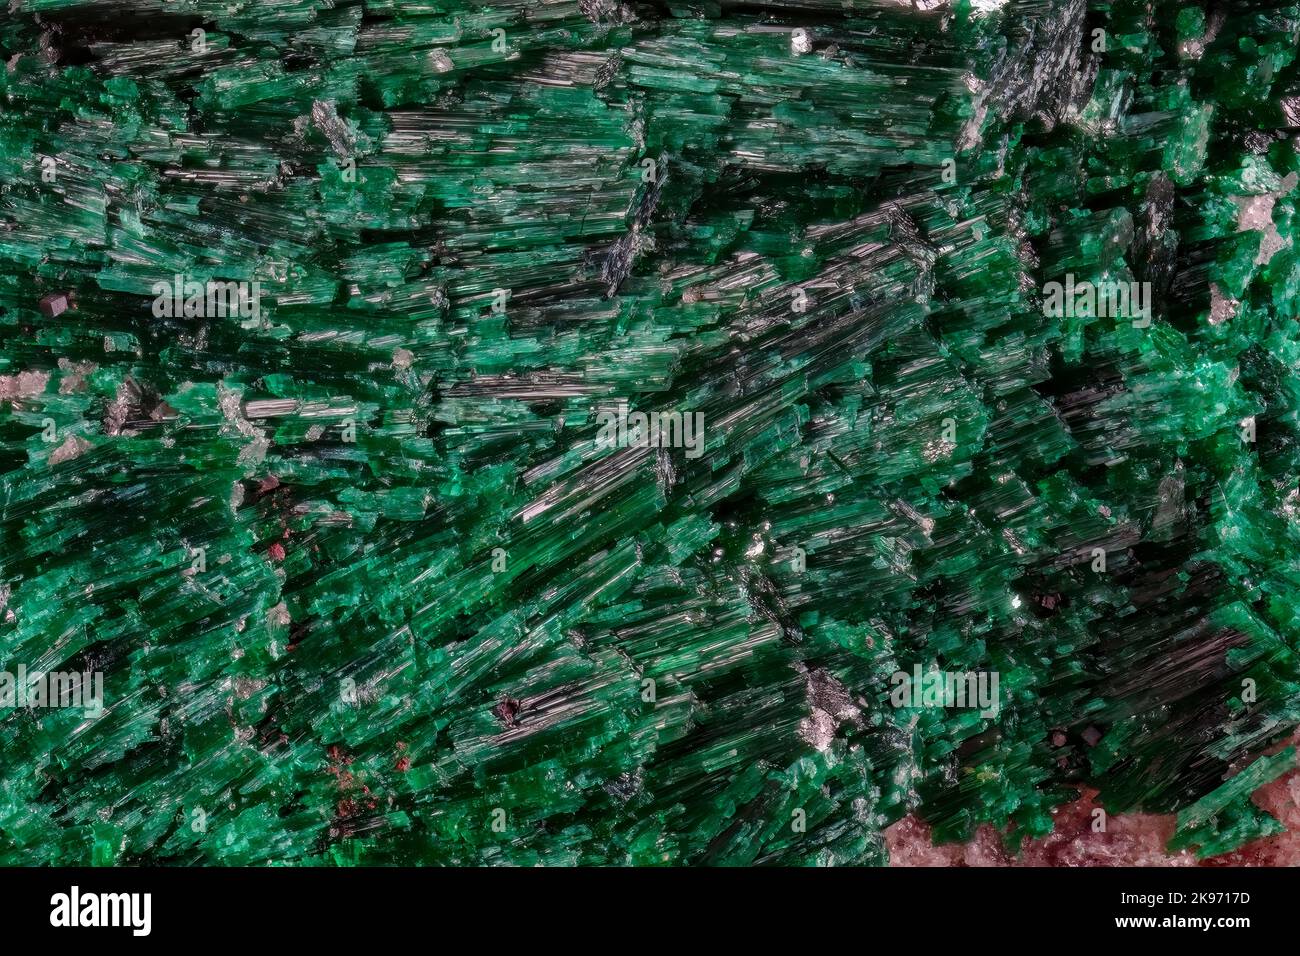 Brochantite 2x, Bisbee Co., Arizona Brochantite is a sulfate mineral, one of a number of cupric sulfates. Stock Photo